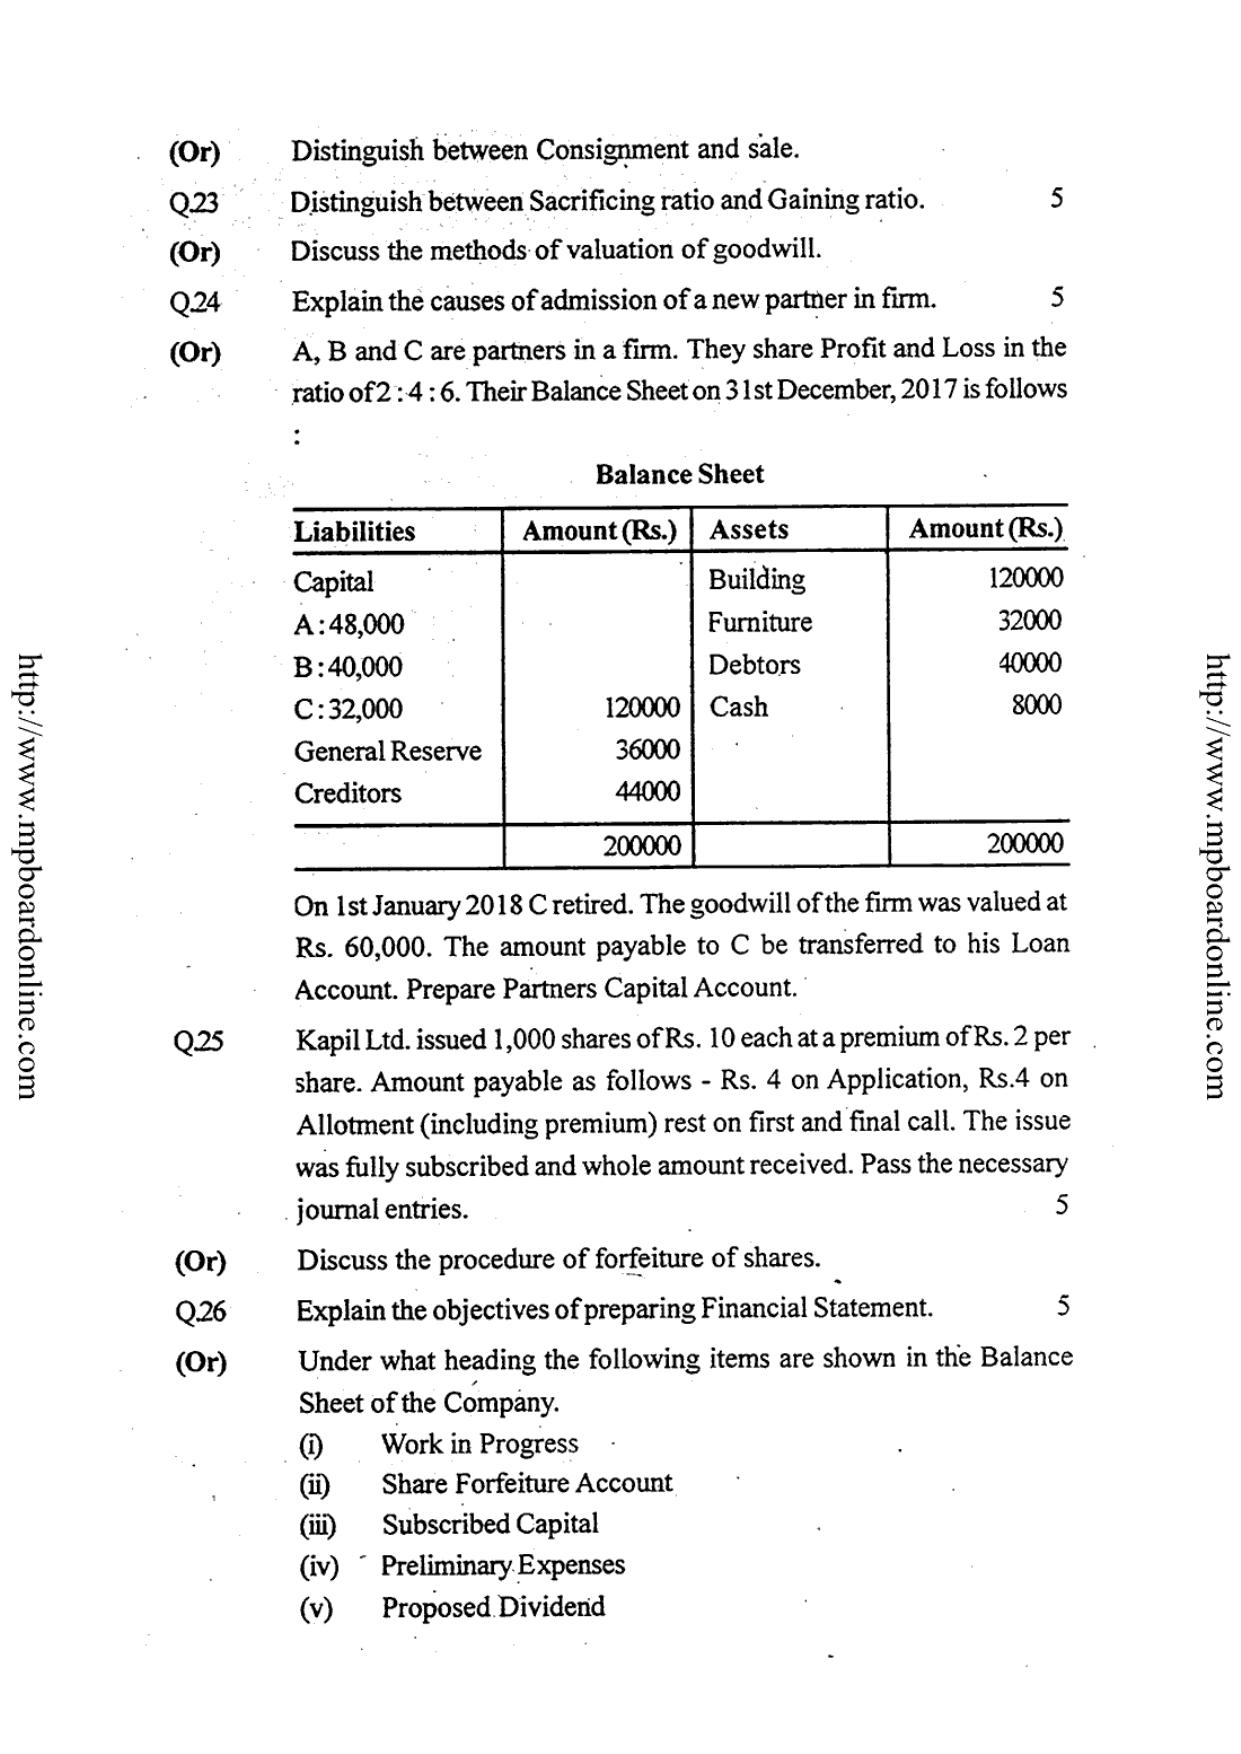 MP Board Class 12 Book Keeping And Accountancy 2018 Question Paper - Page 6